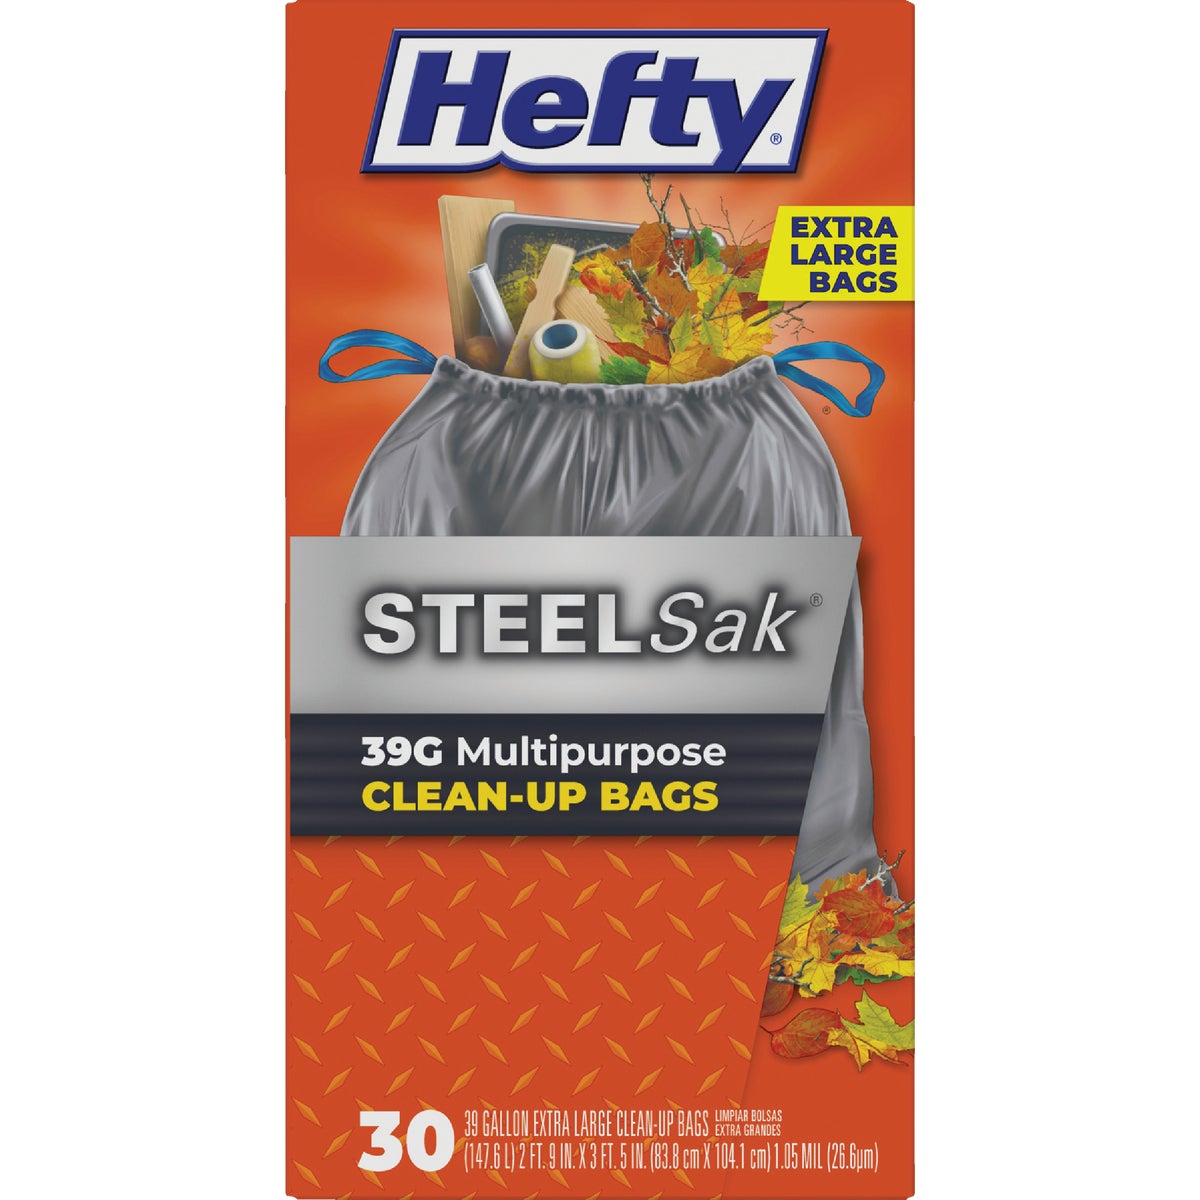 Item 629669, Steel Sak heavy duty trash bags are tear and puncture resistant.